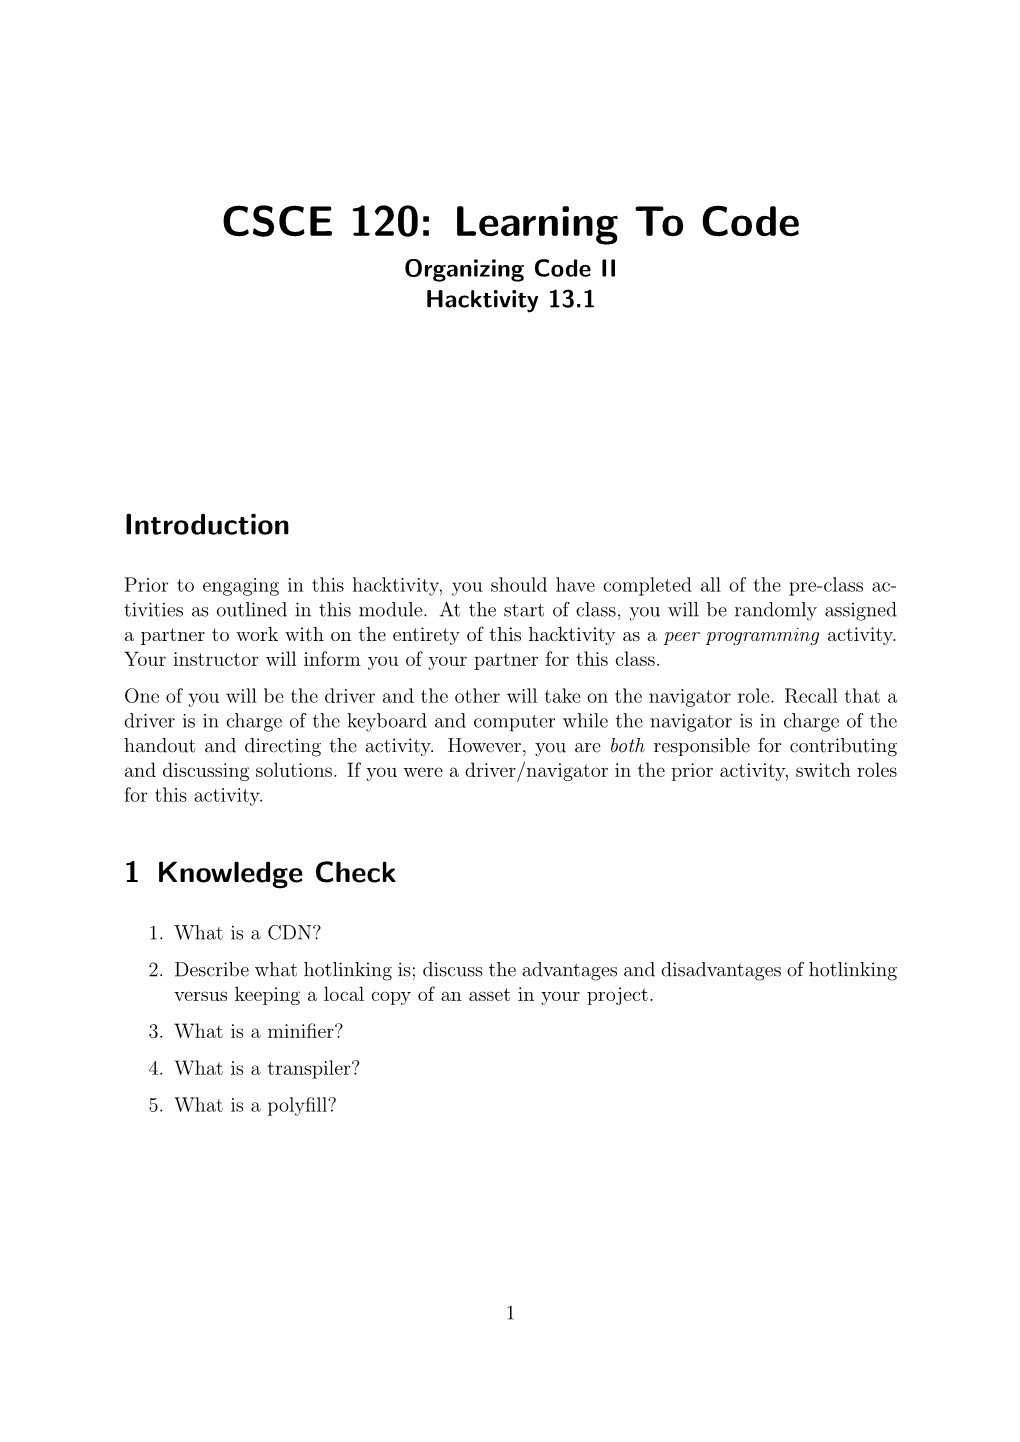 CSCE 120: Learning to Code Organizing Code II Hacktivity 13.1